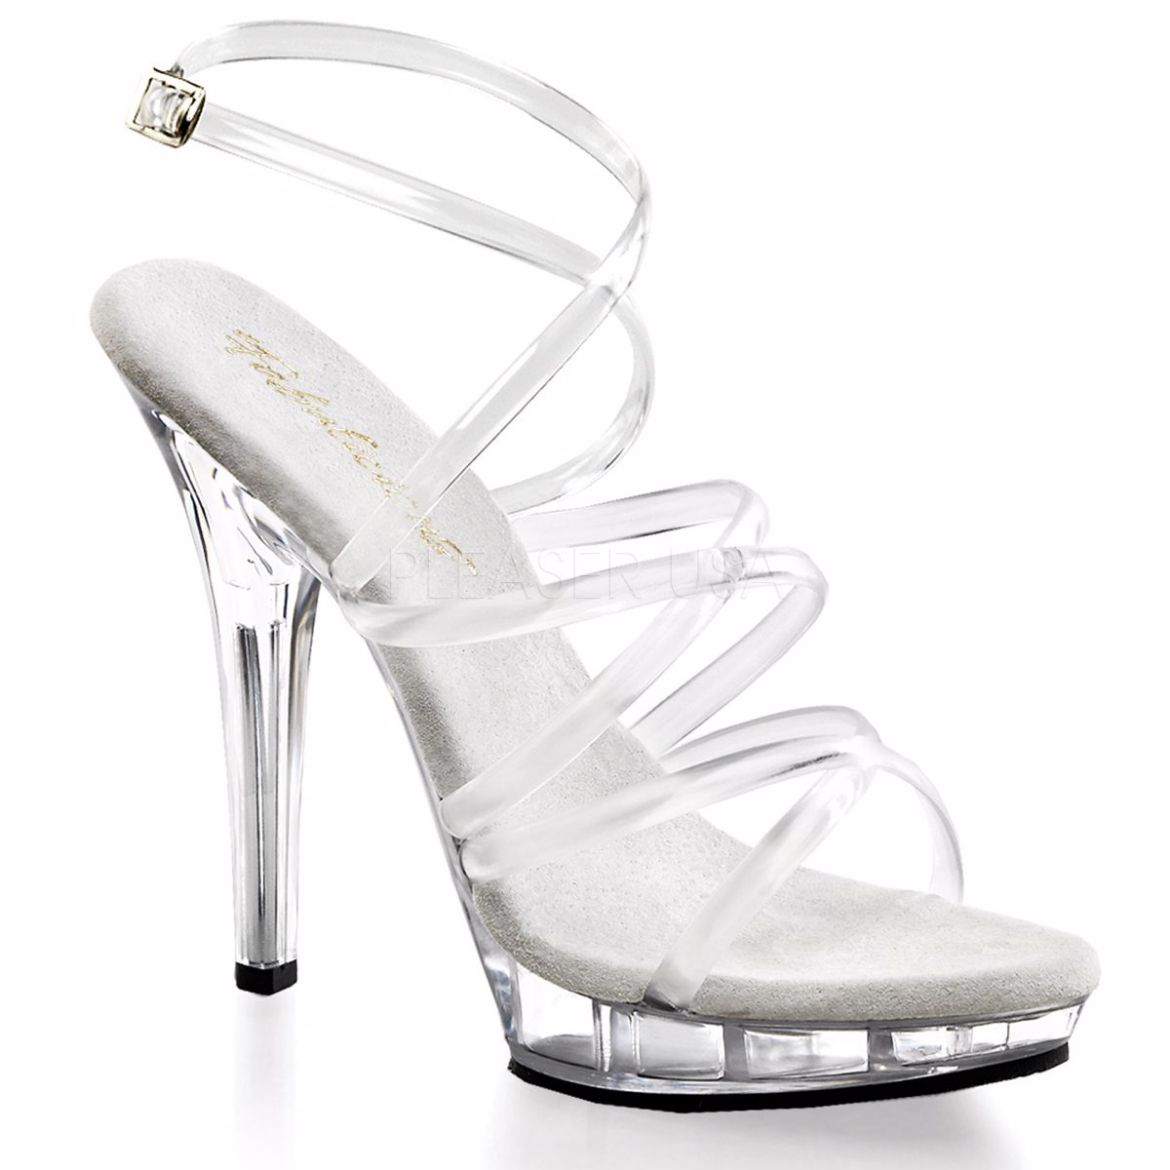 Product image of Fabulicious Lip-106 Clear/Clear, 5 inch (12.7 cm) Heel, 3/4 inch (1.9 cm) Platform Sandal Shoes